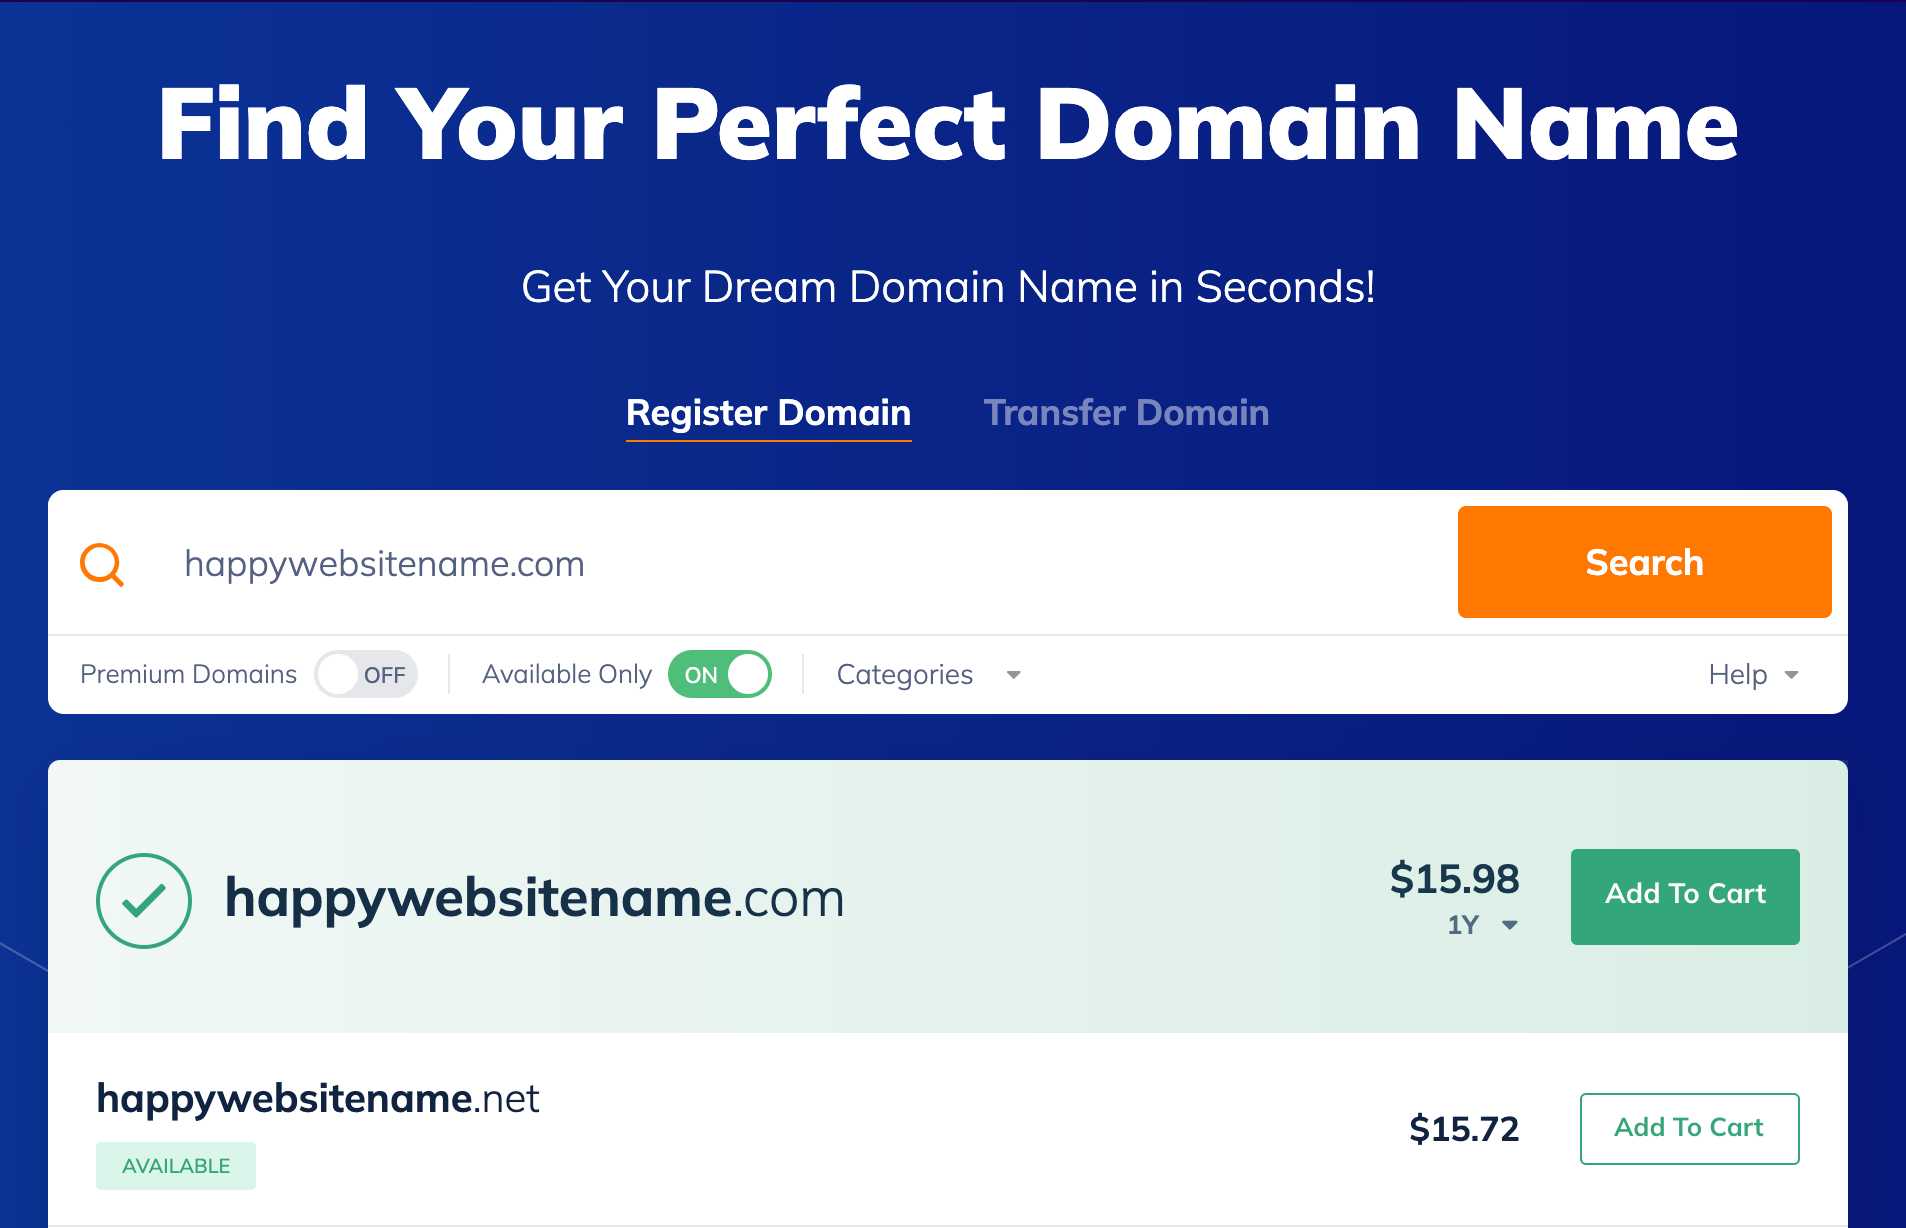 You can search for available domain names through website hosting services like NameHero.